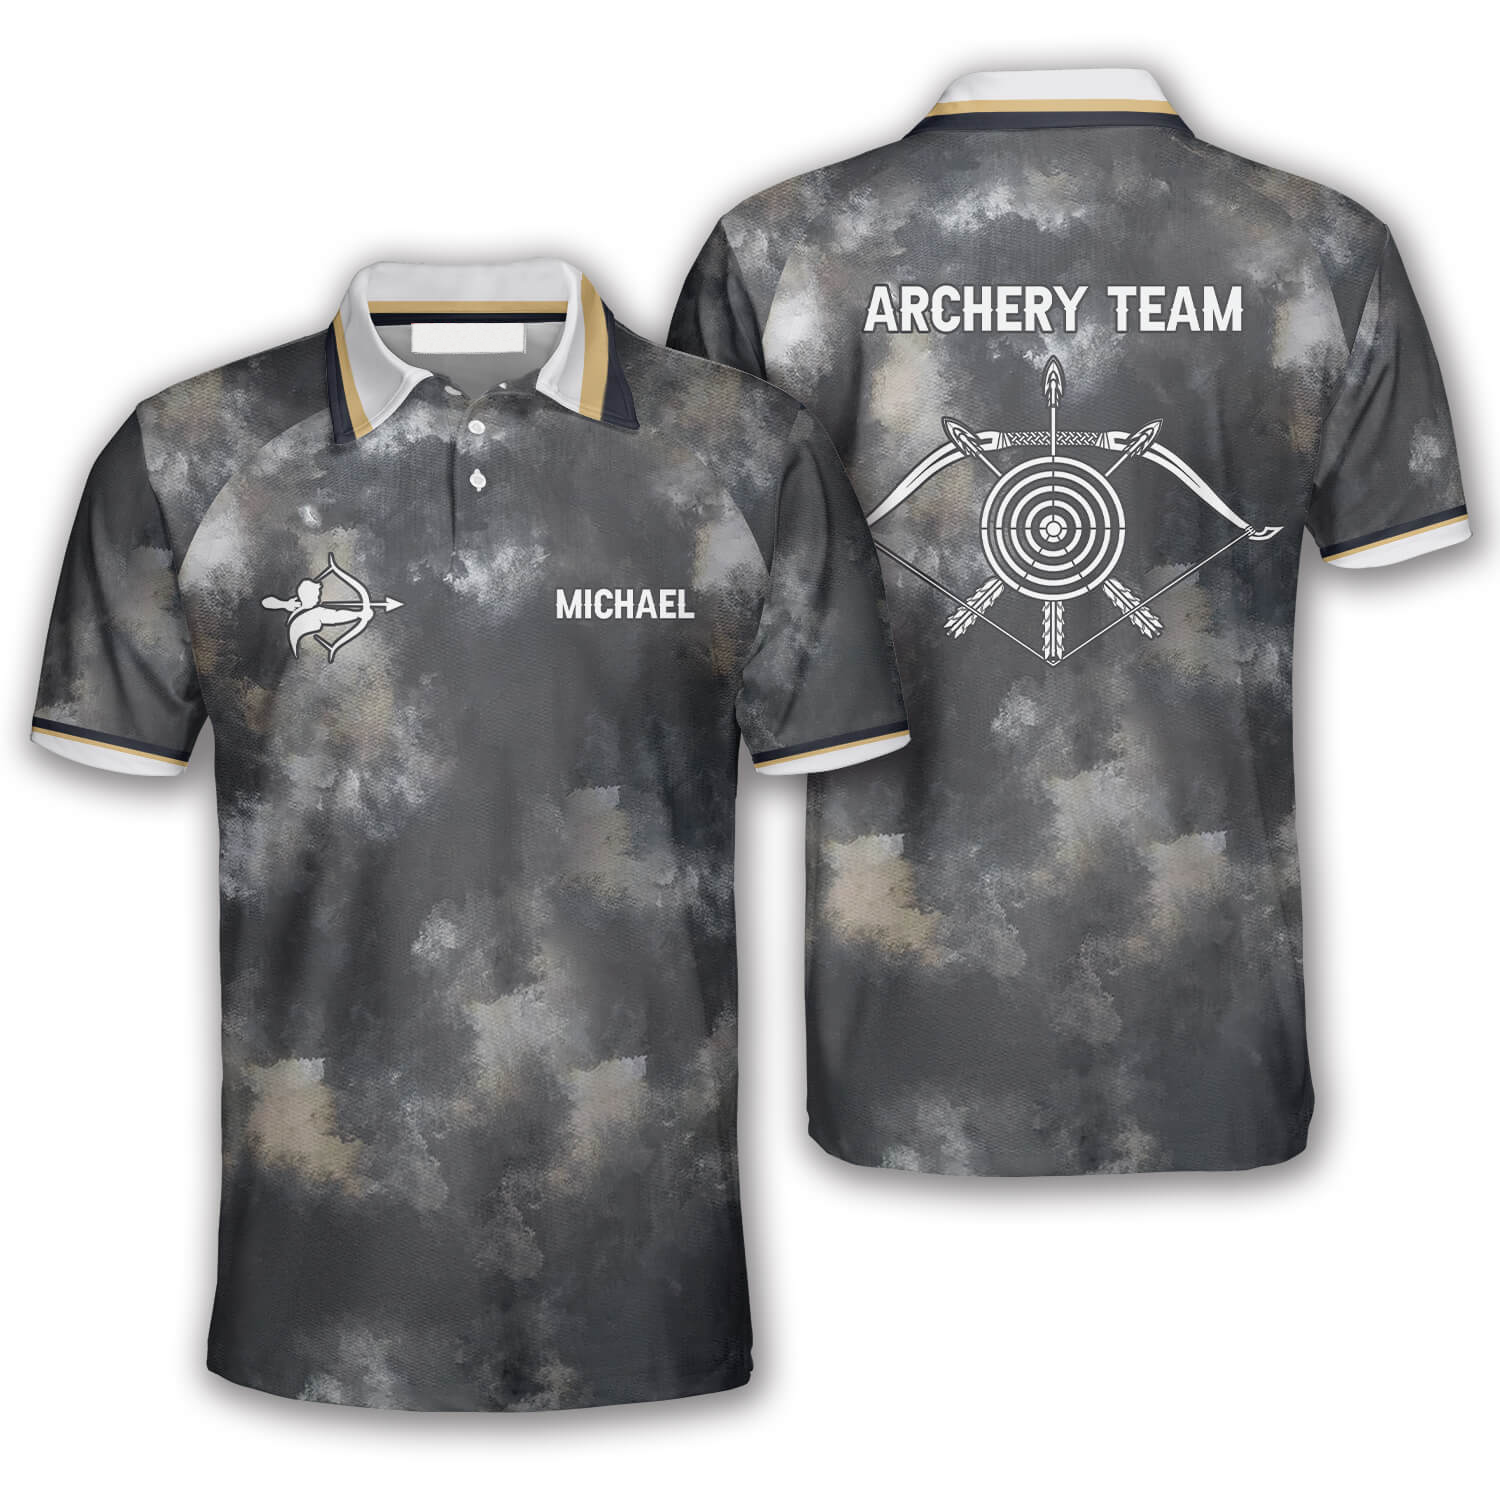 3D All Over Print Archery Tie dye Pattern Custom Archery Shirts For Men/ Idea Gift for Archery Lover